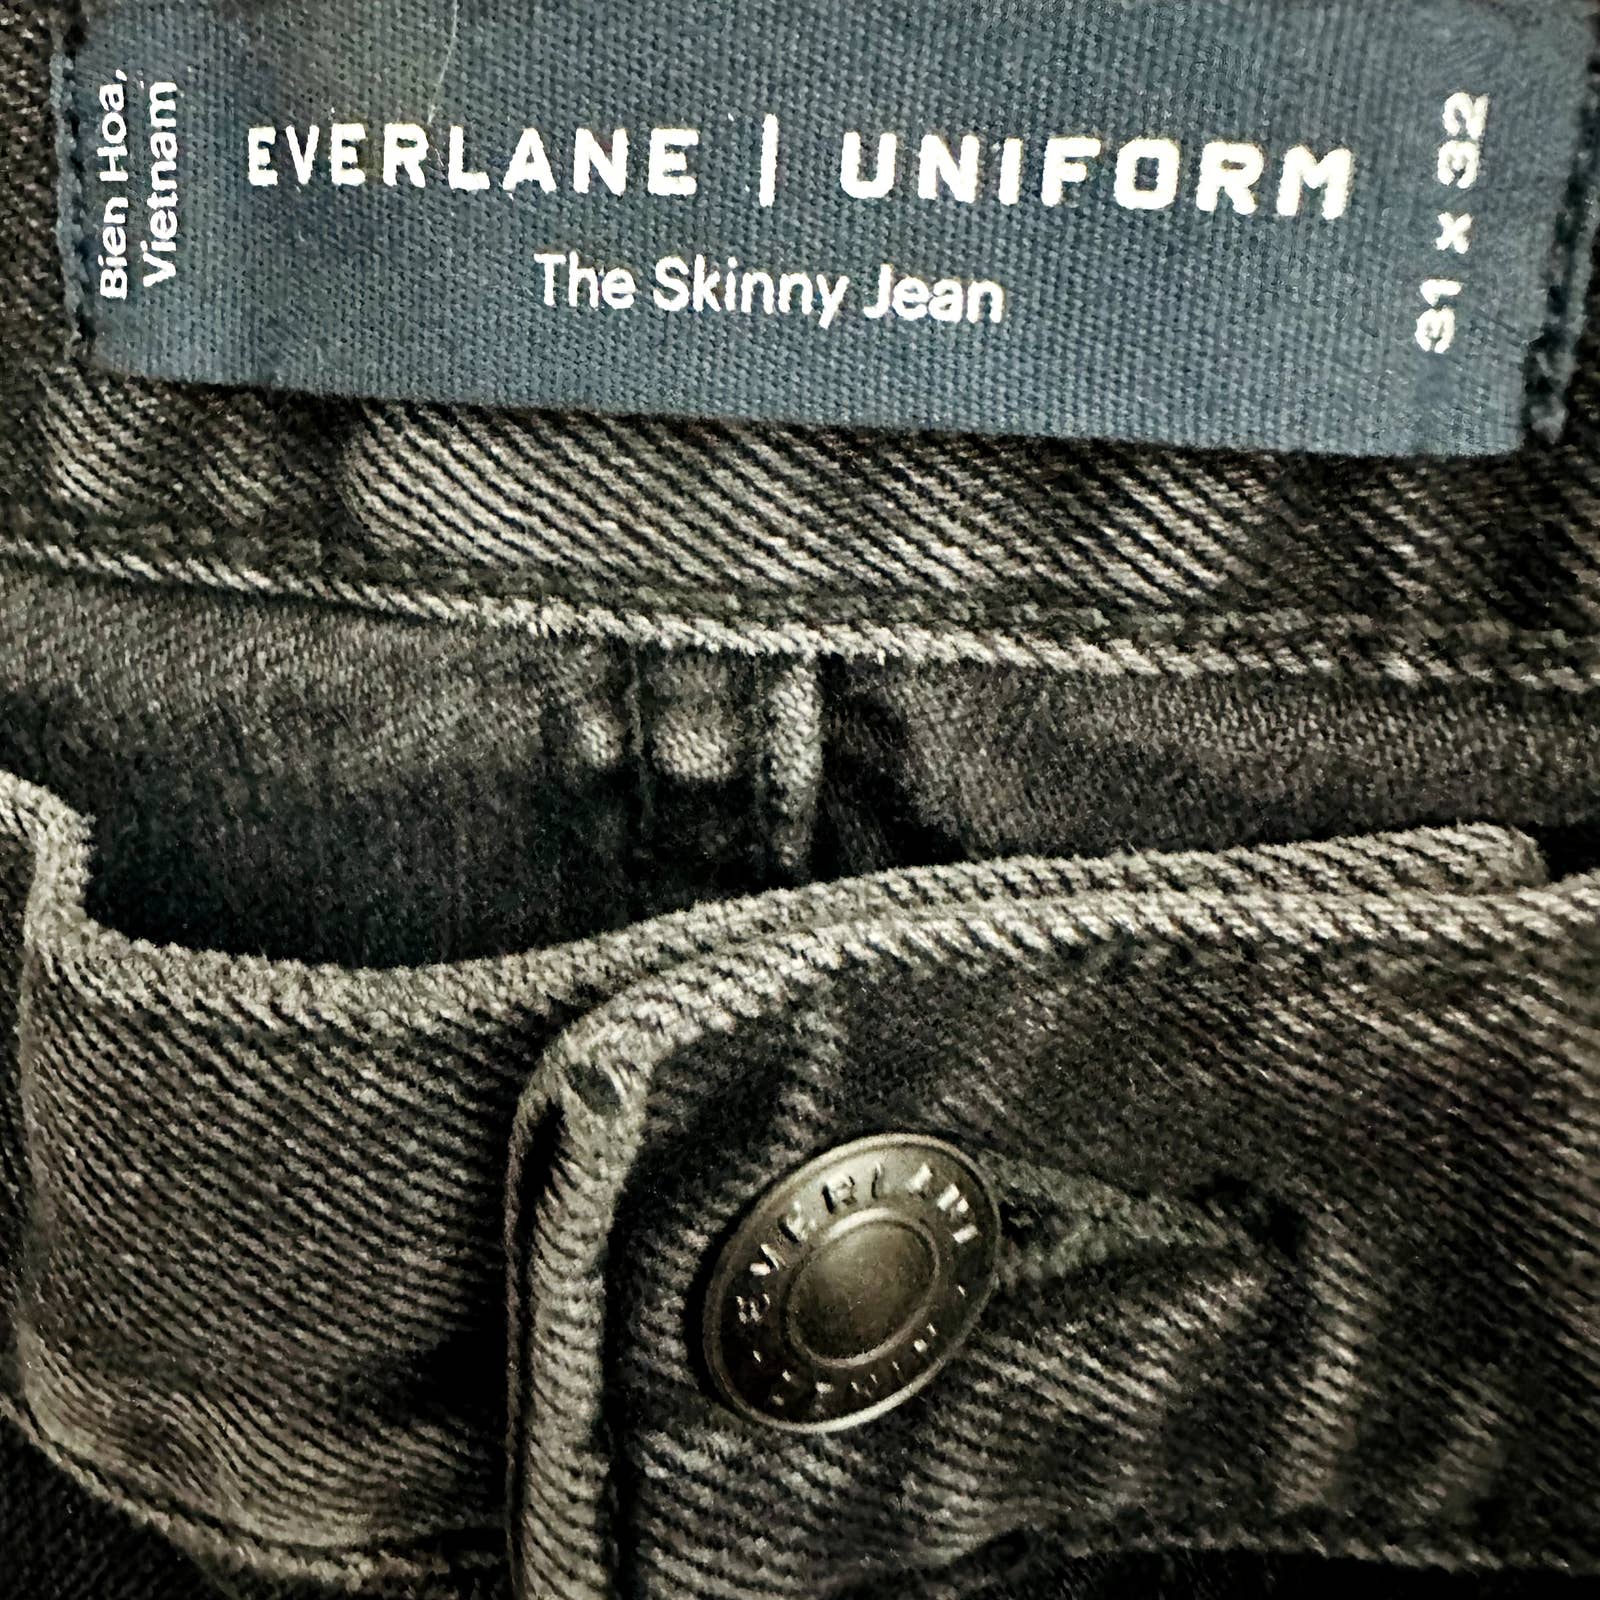 Everlane NWOT Uniform The Skinny Fit Business Casual Jeans Washed Black Sz 31x32